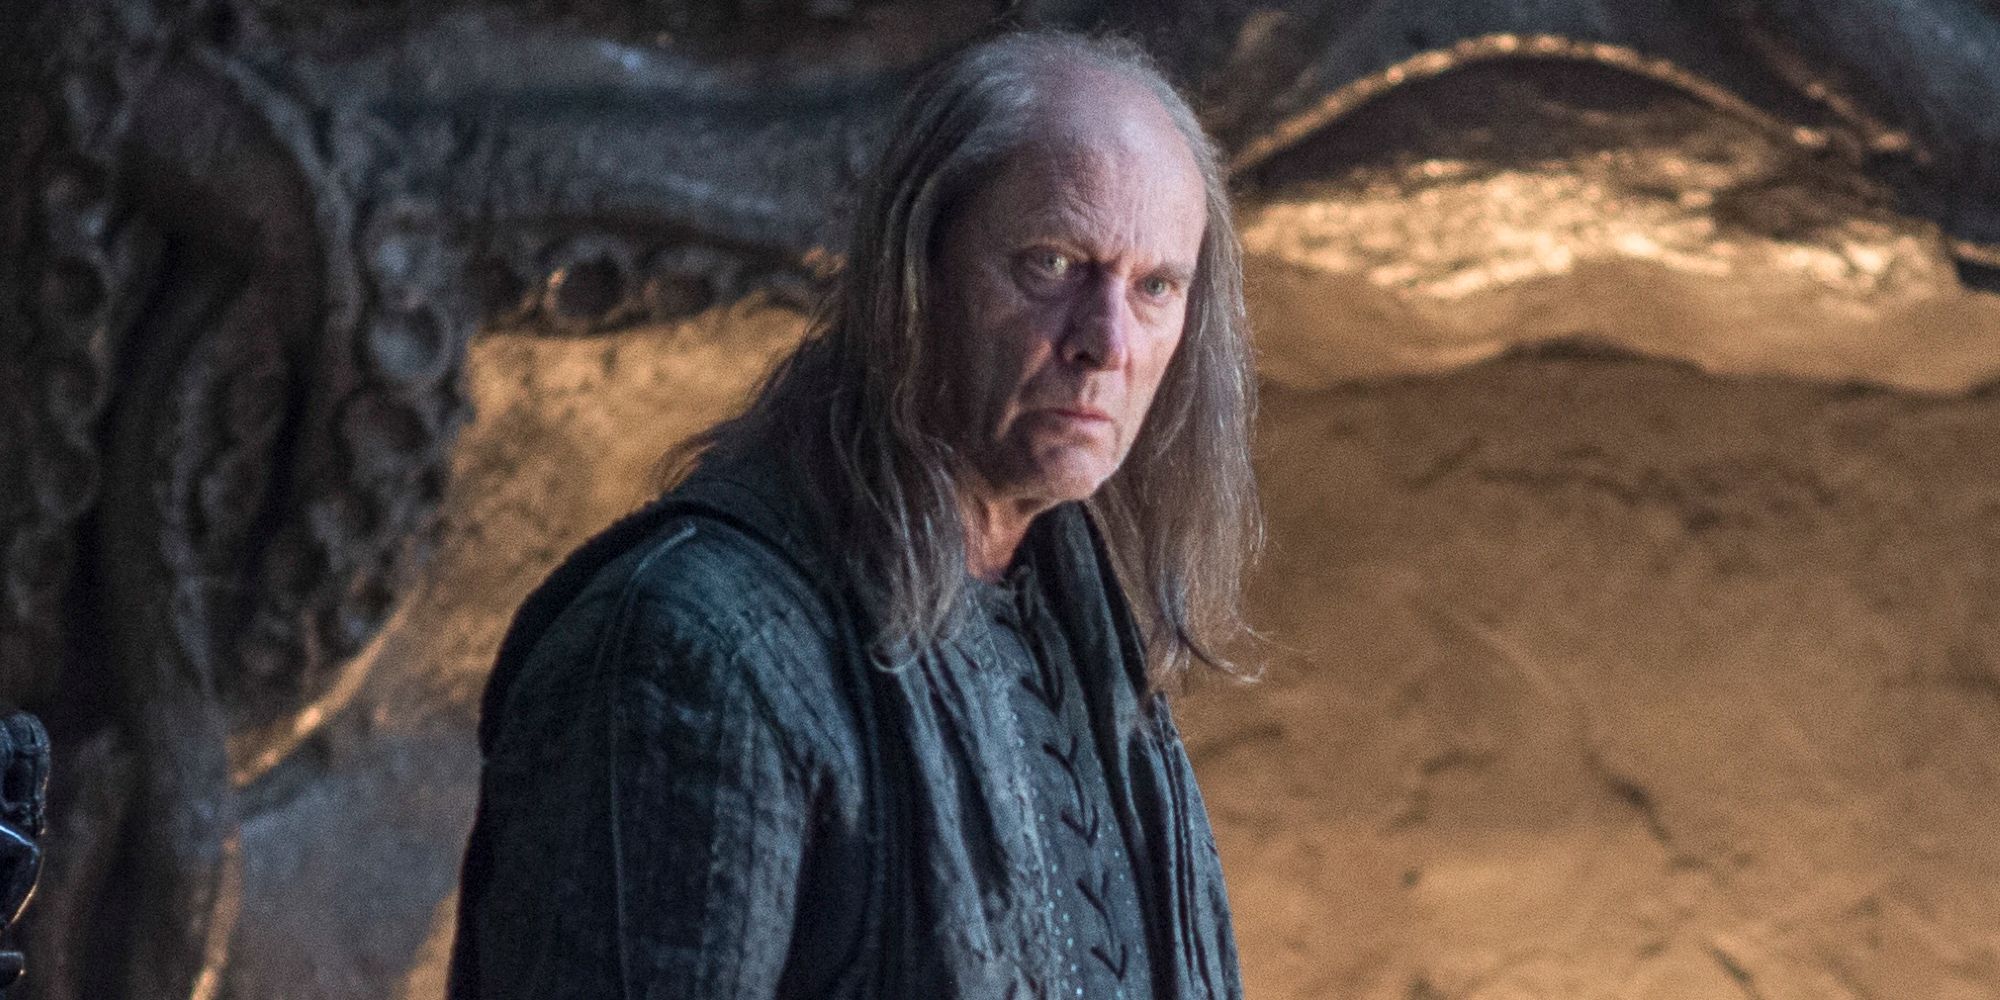 Balon Greyjoy as he appears in Game of Thrones